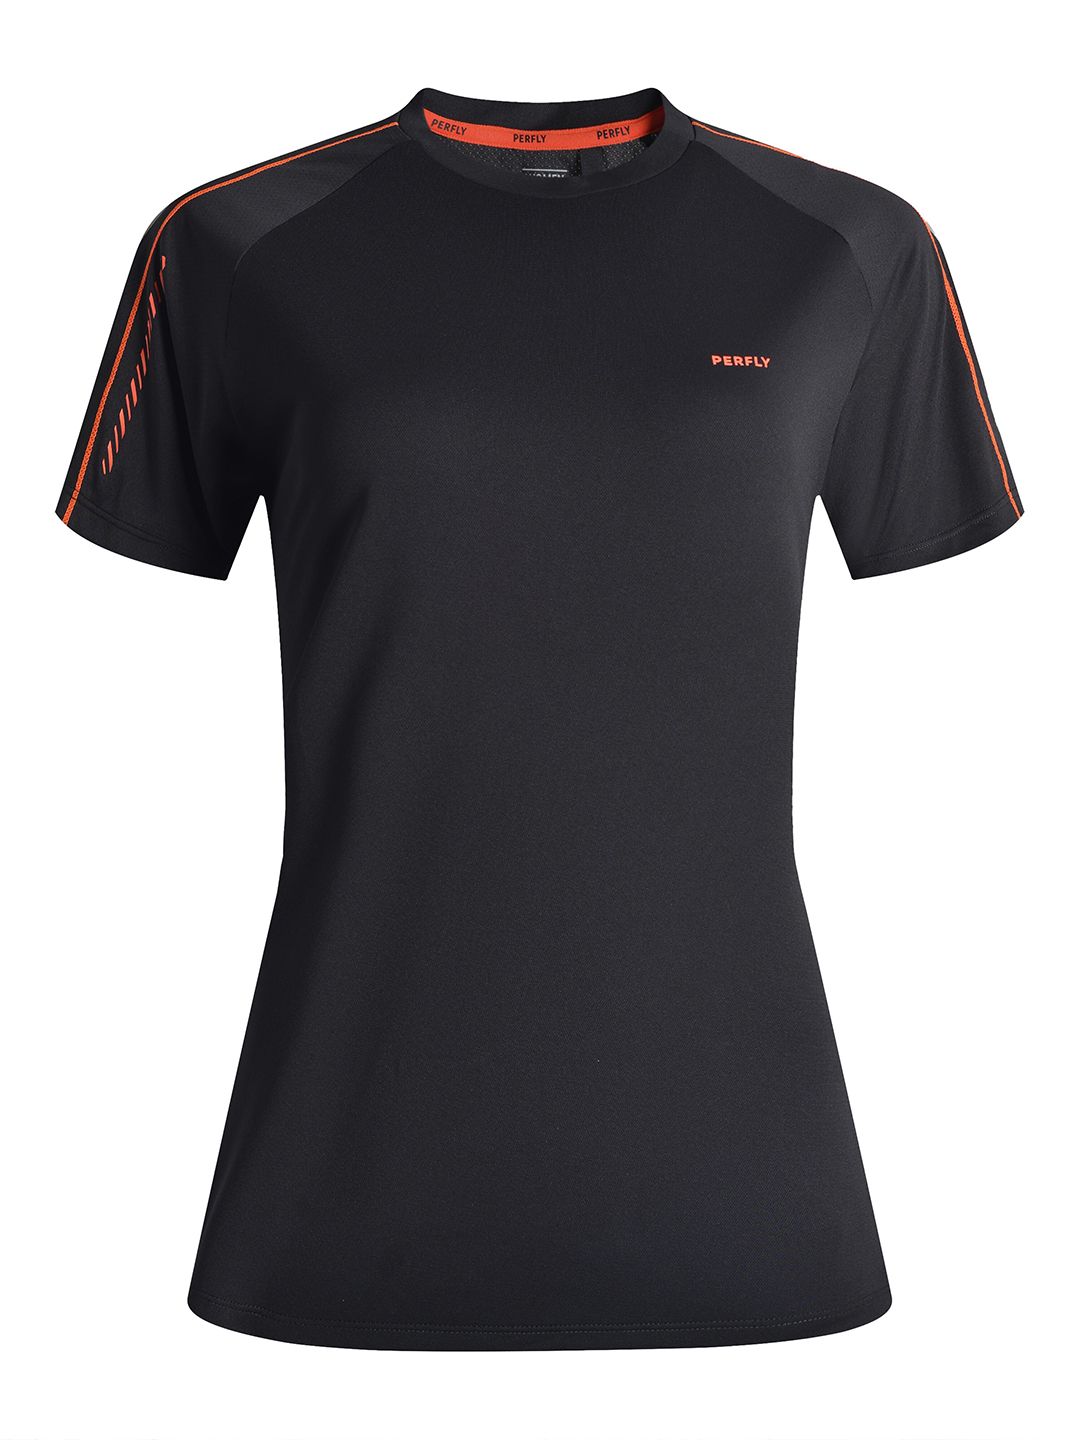 PERFLY By Decathlon Women Black T-shirt Price in India